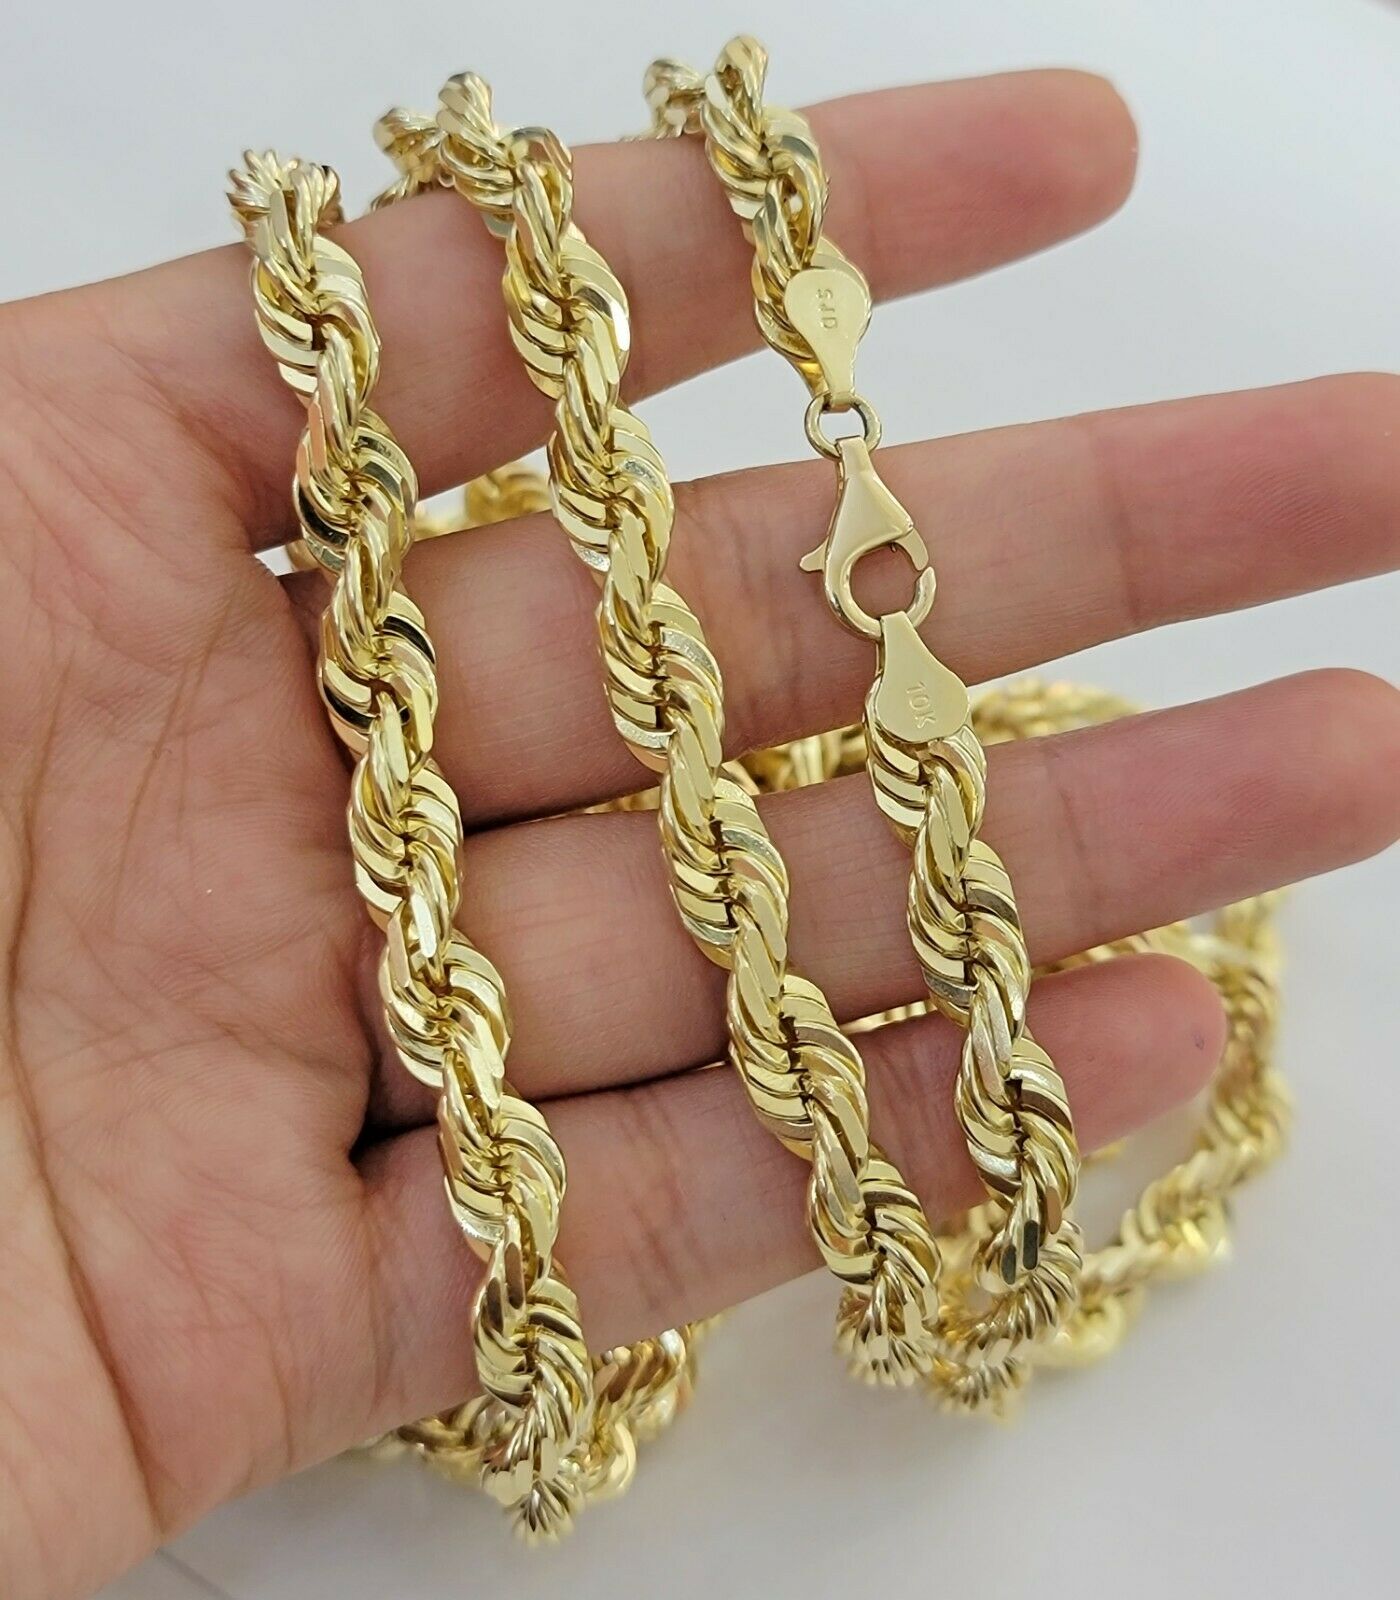 Solid Gold 10K Rope Chain 8mm 18-30 inch 10kt Yellow Gold Necklace Diamond Cut 22 inch